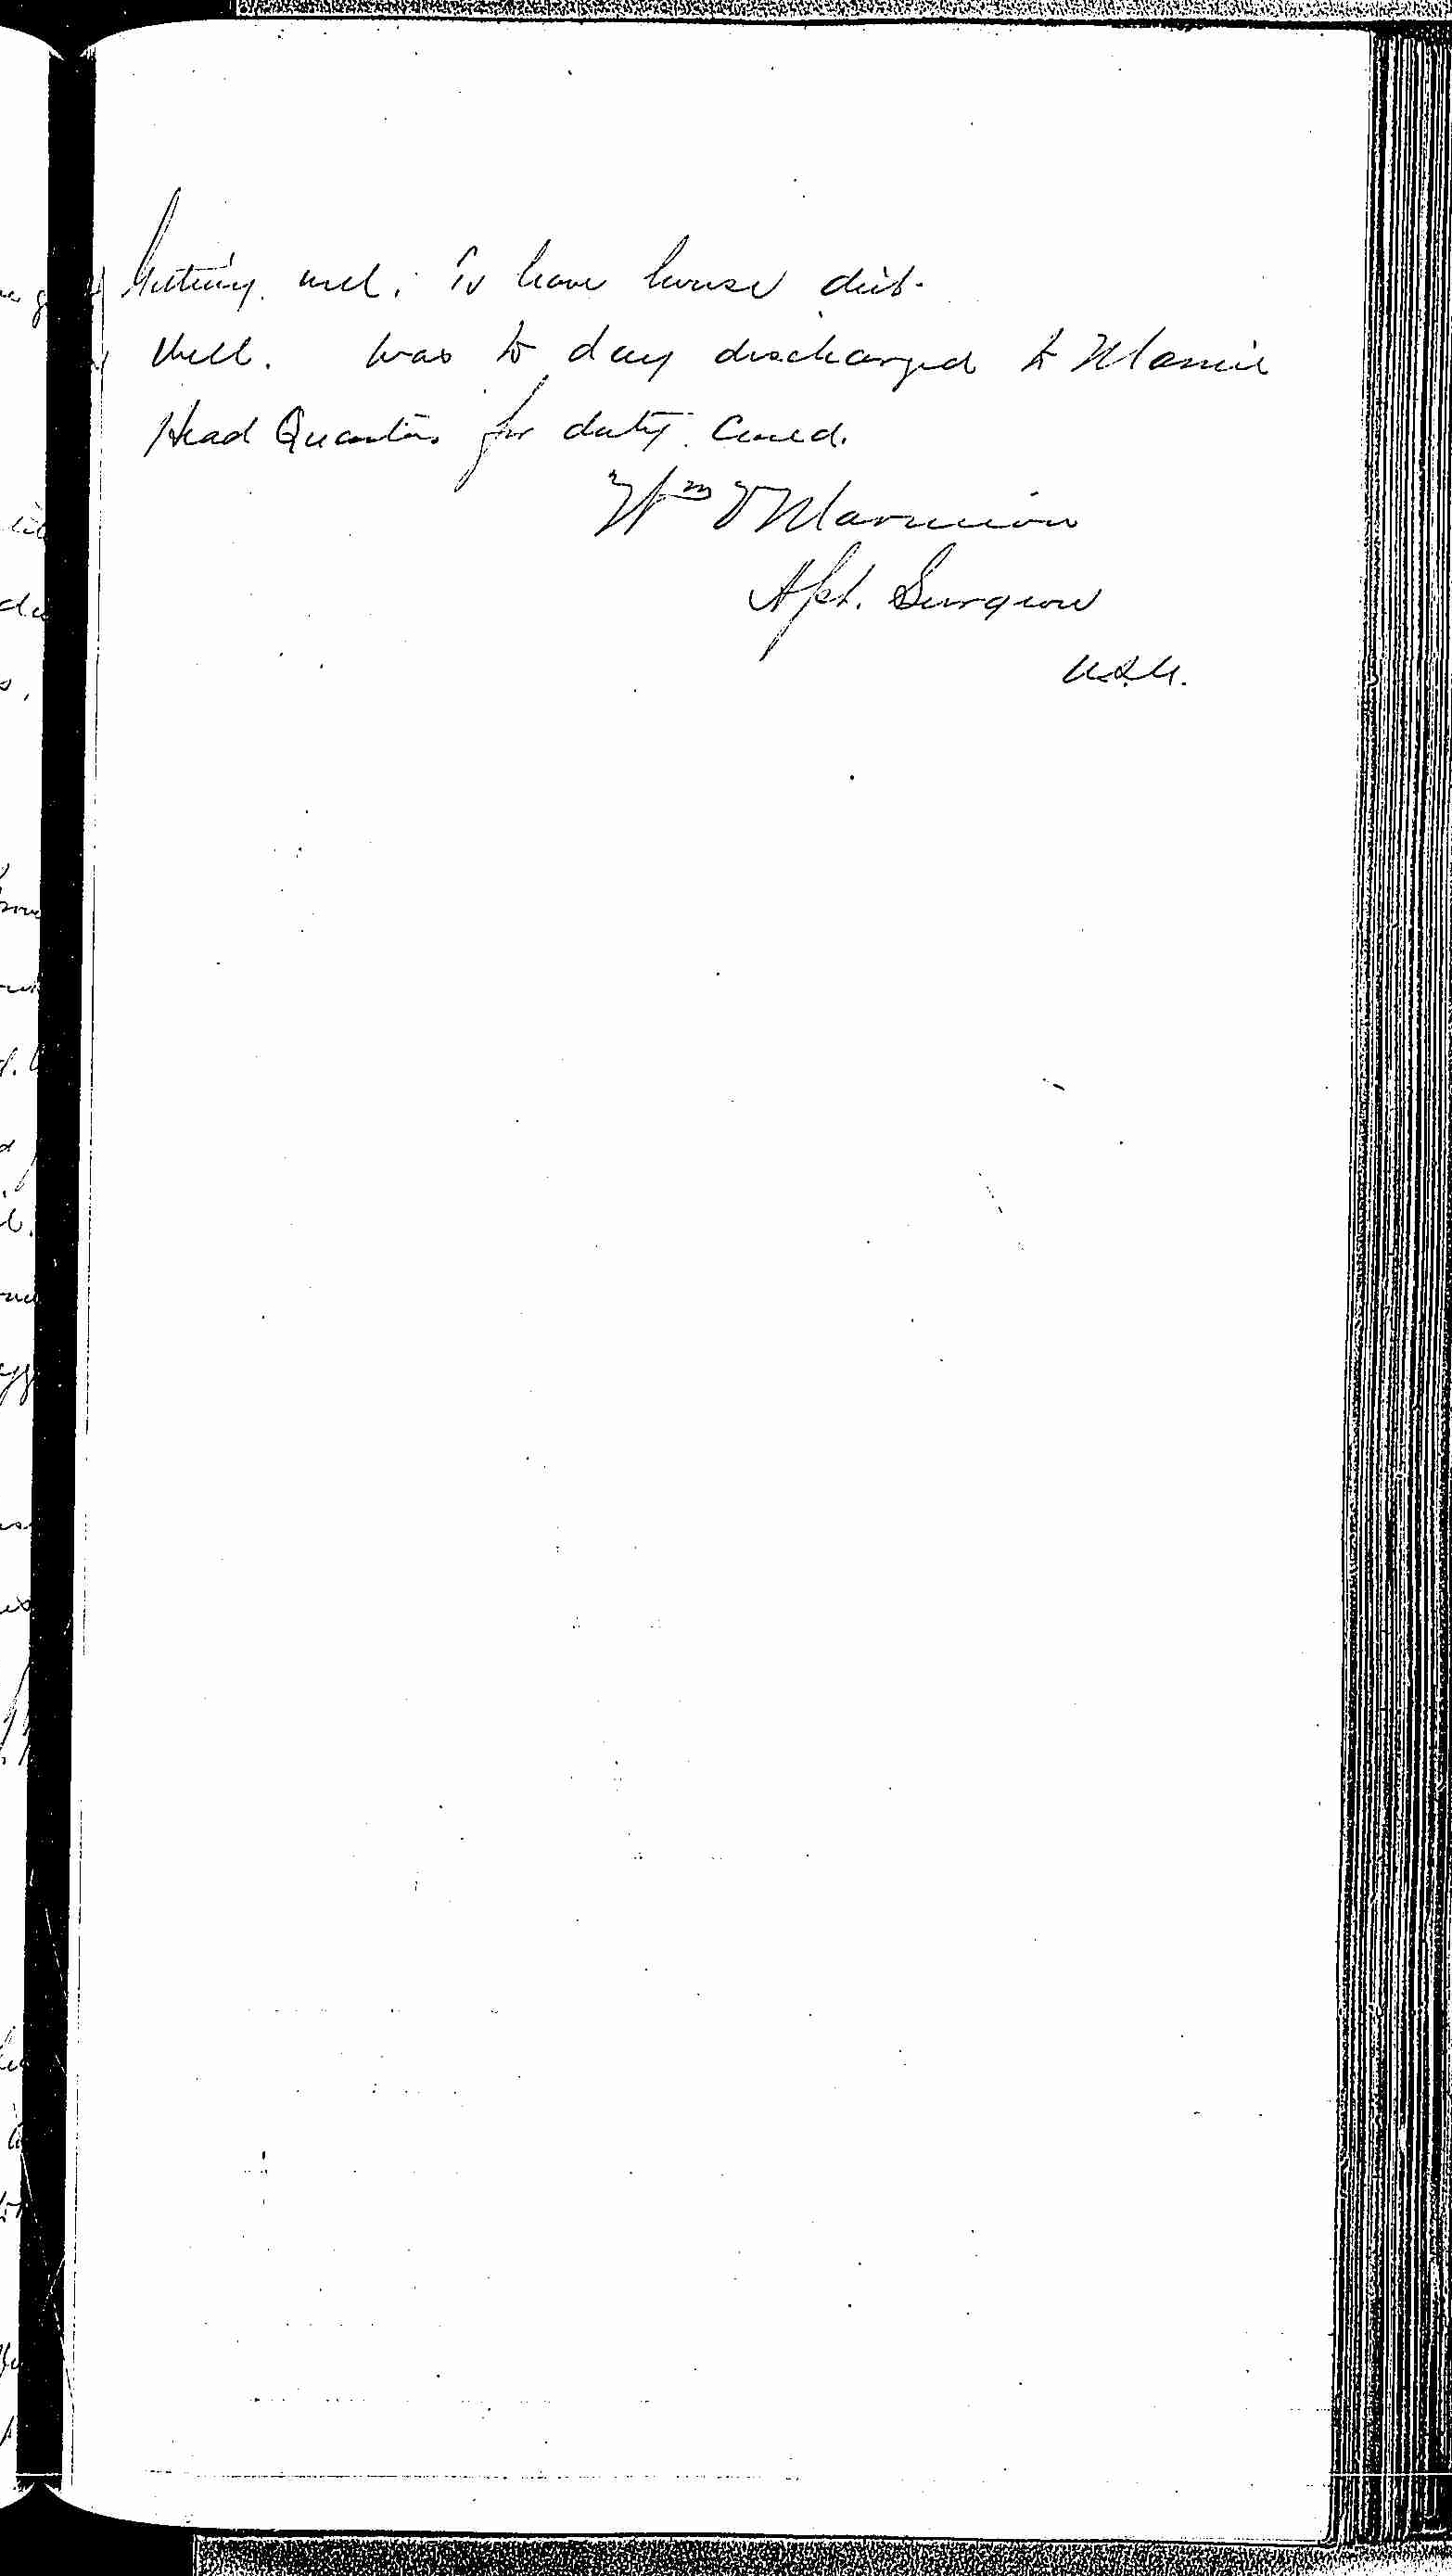 Entry for Patrick J. Leonard (page 3 of 3) in the log Hospital Tickets and Case Papers - Naval Hospital - Washington, D.C. - 1868-69